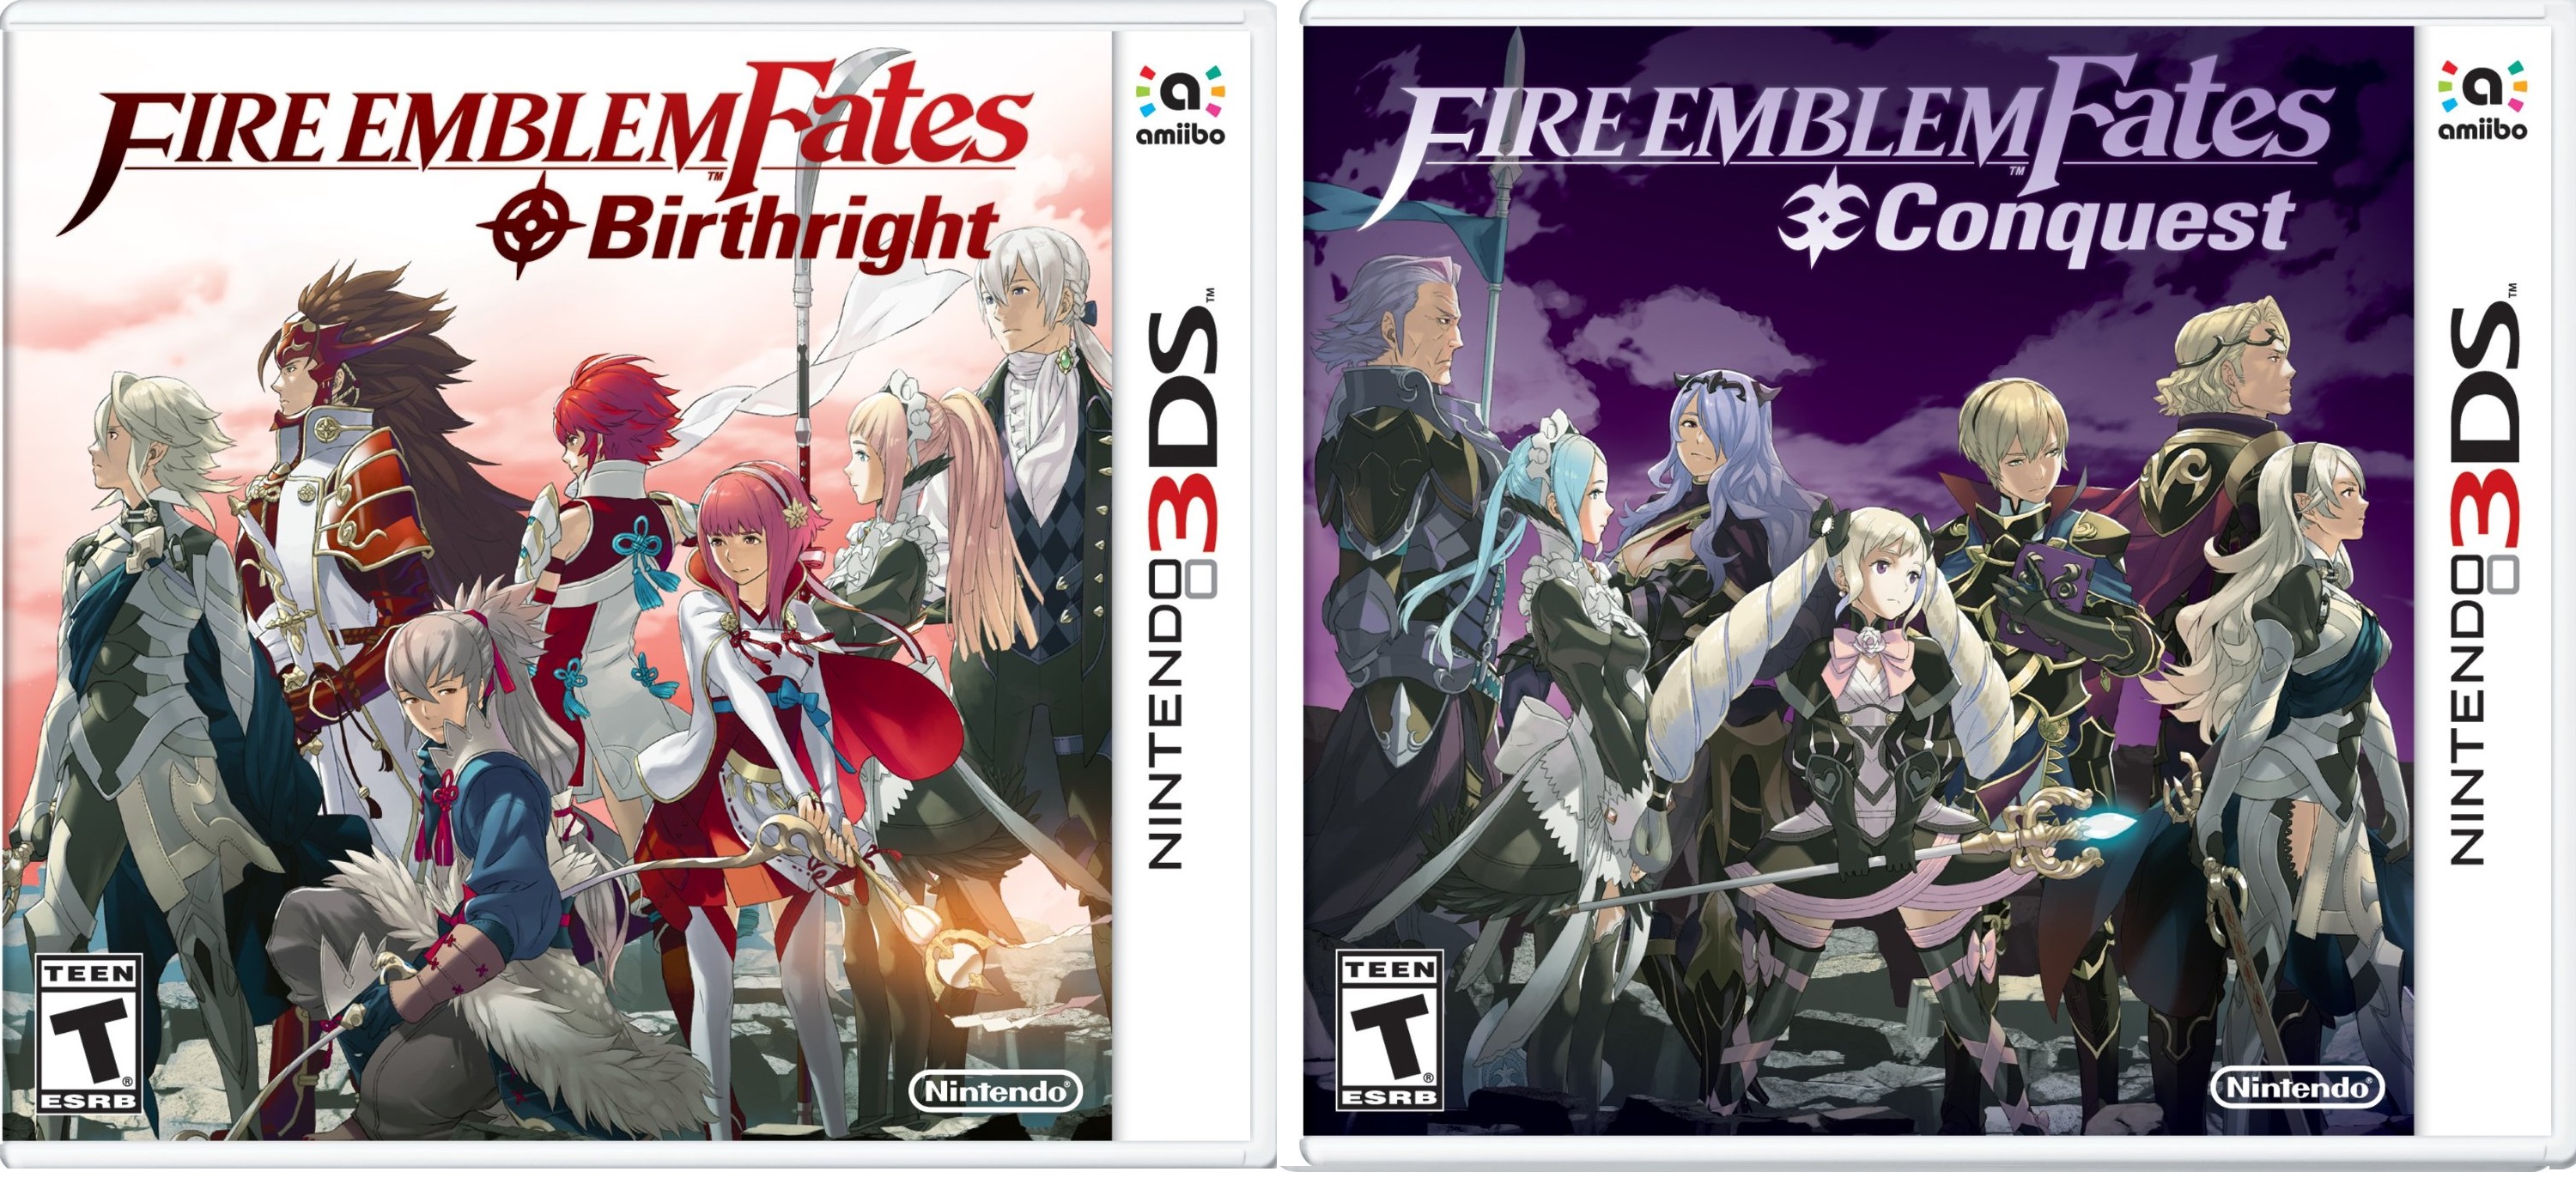 Fire Emblem Fates Review (Nintendo 3DS) - Official GBAtemp Review |  GBAtemp.net - The Independent Video Game Community